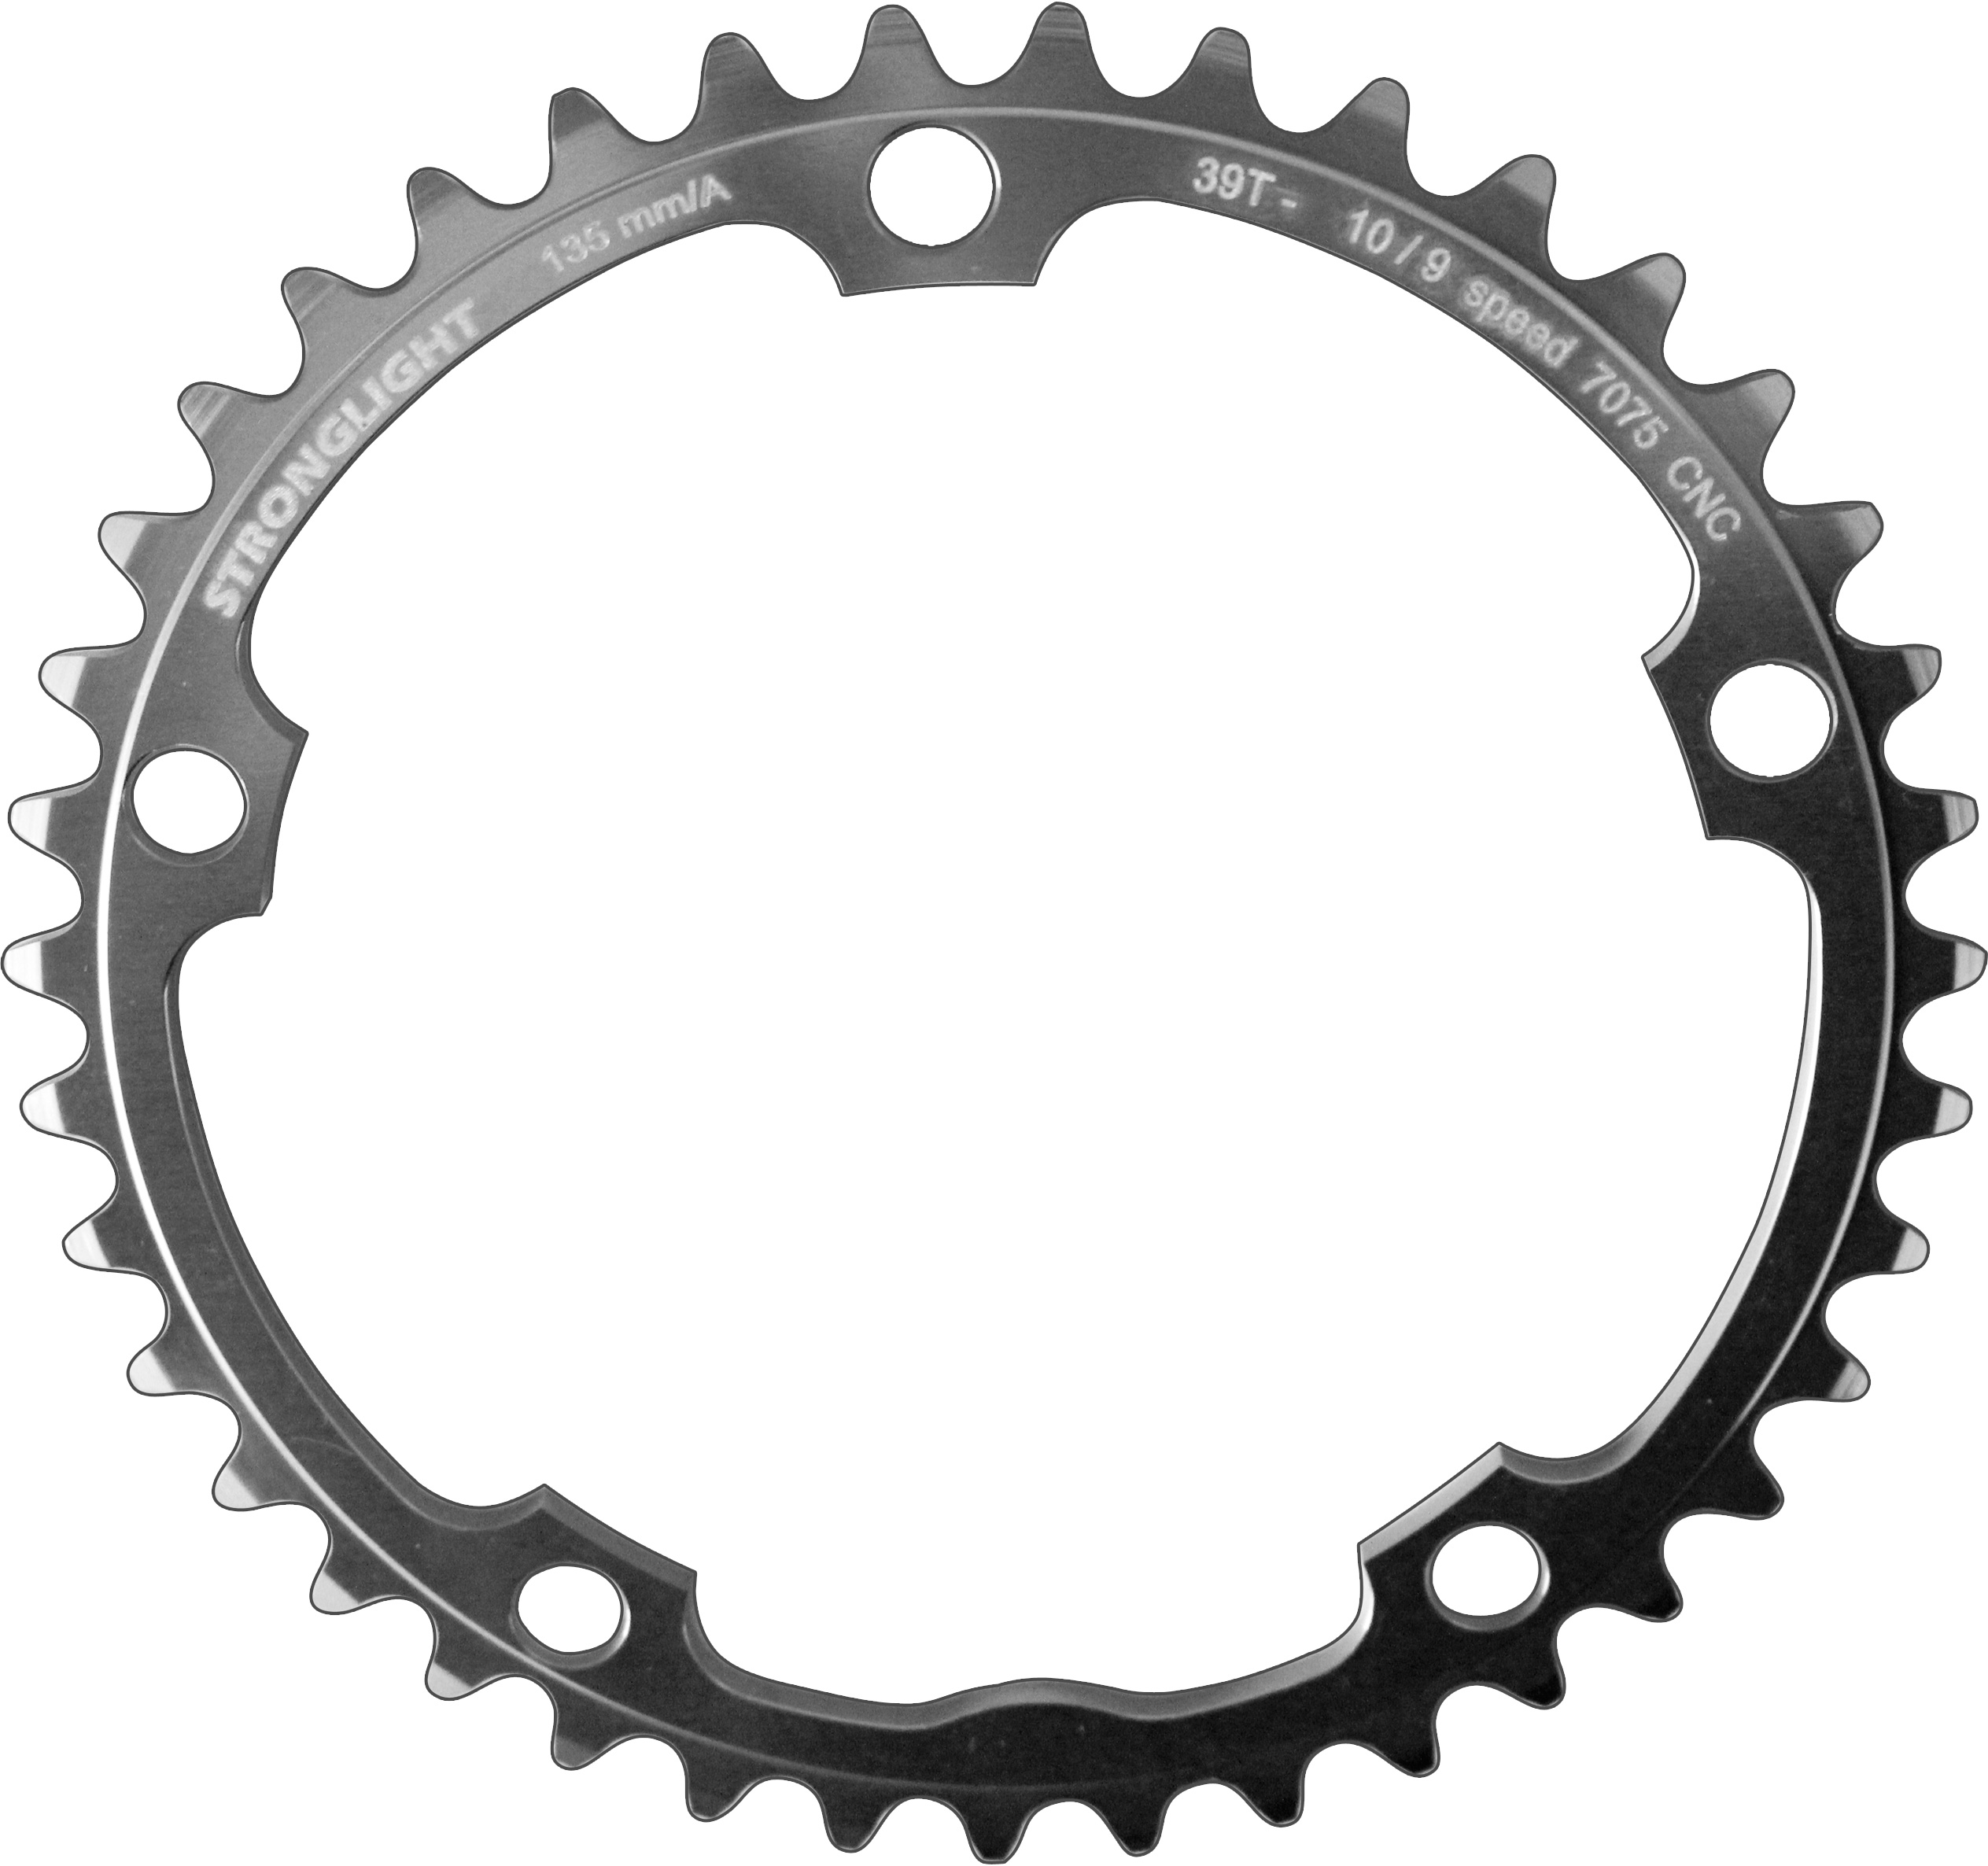 RZA135S51 Stronglight 51T 5-Arm/135mm Chainring